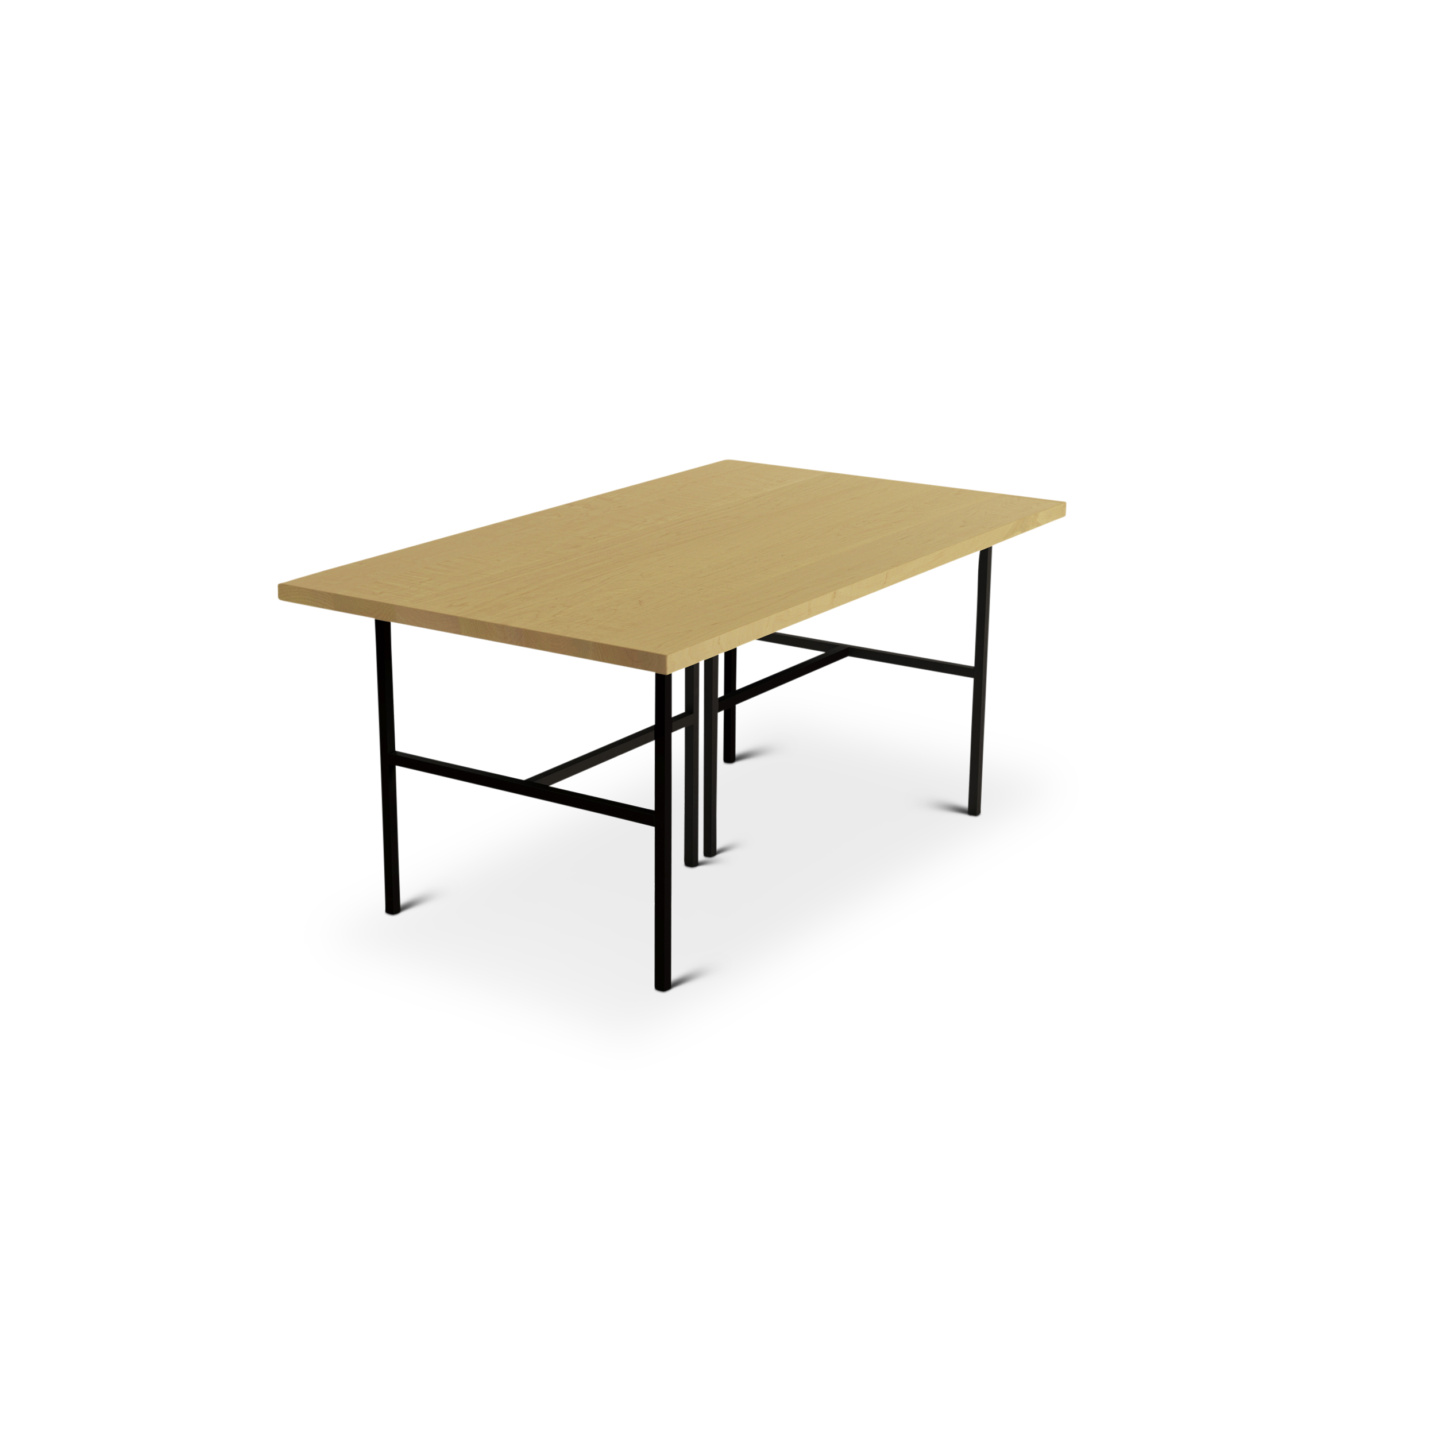 Solid maple modern dining room table with black metal legs